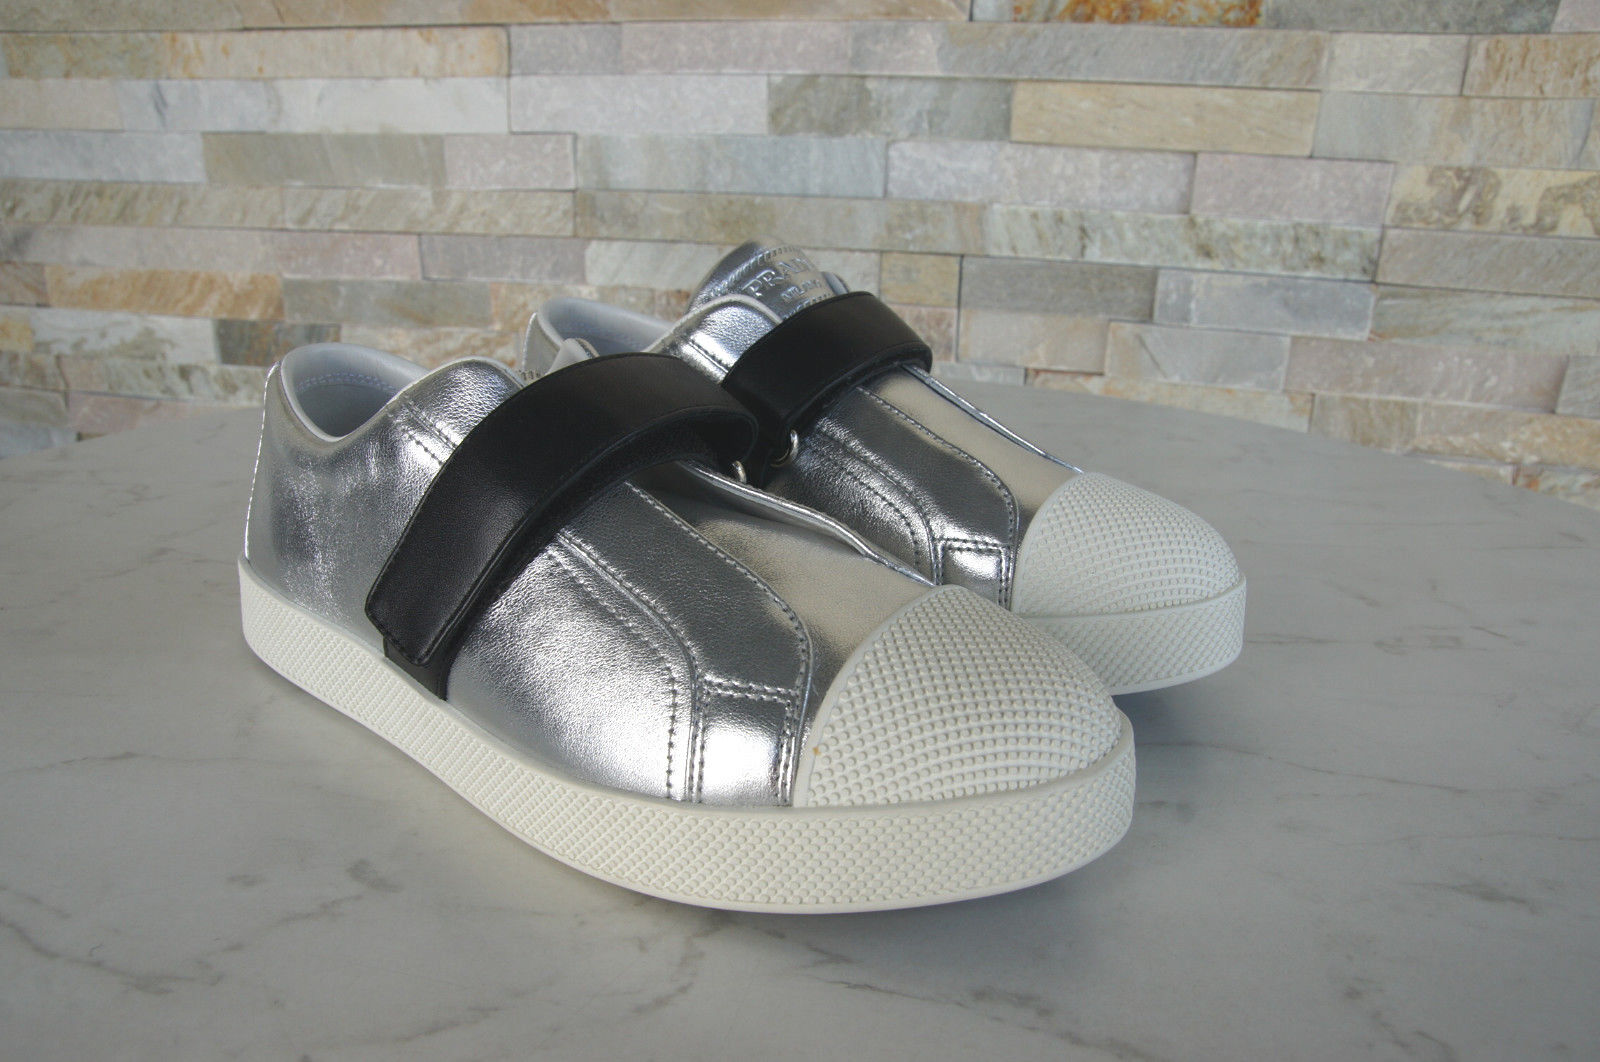 PRADA Size 36,5 Sneakers Loafers Slip-Ons Shoes 3E6274 Silver New Previously